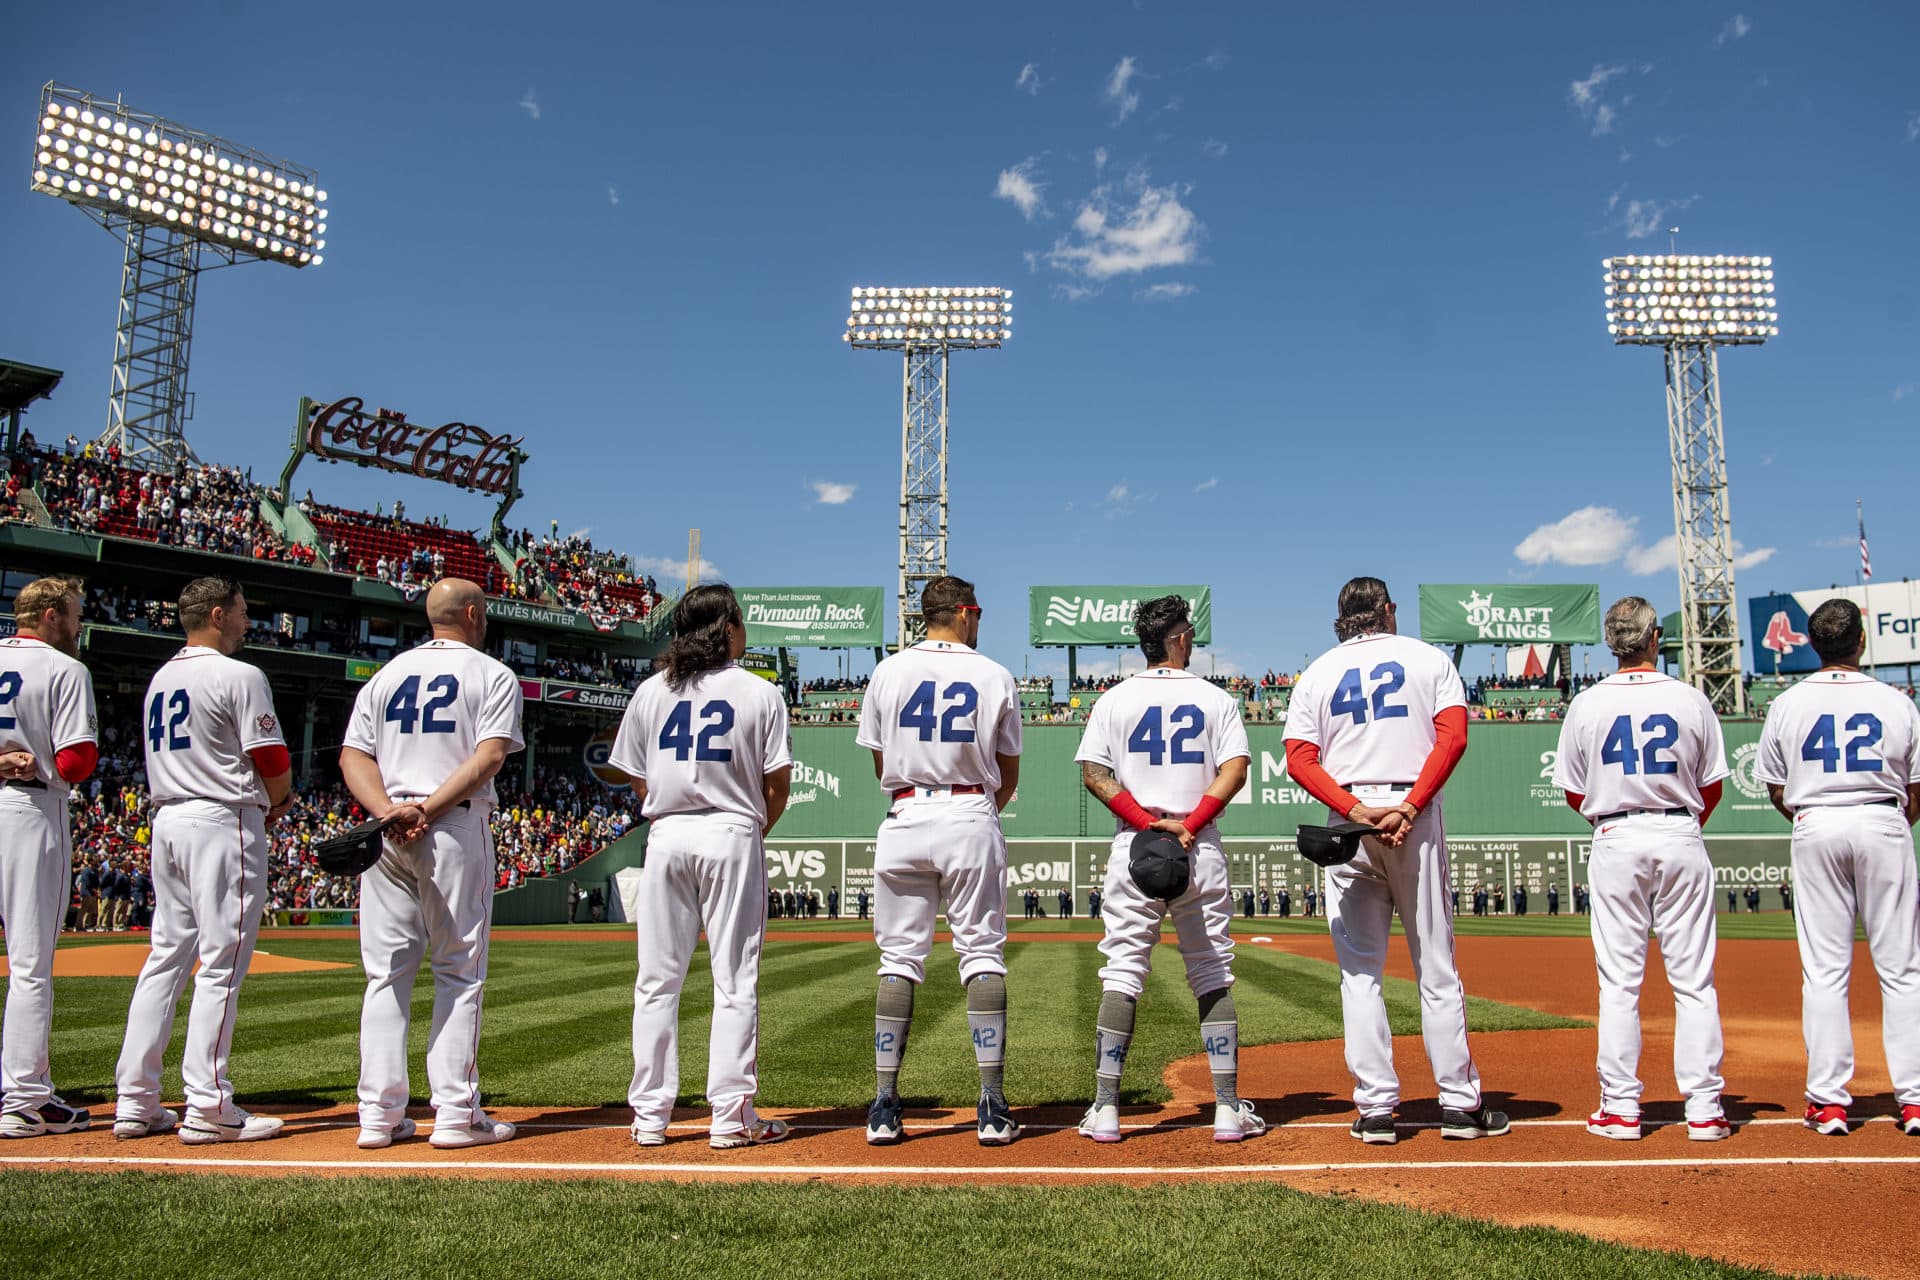 Photos: Red Sox take the field for picture-perfect 2022 Fenway opening day